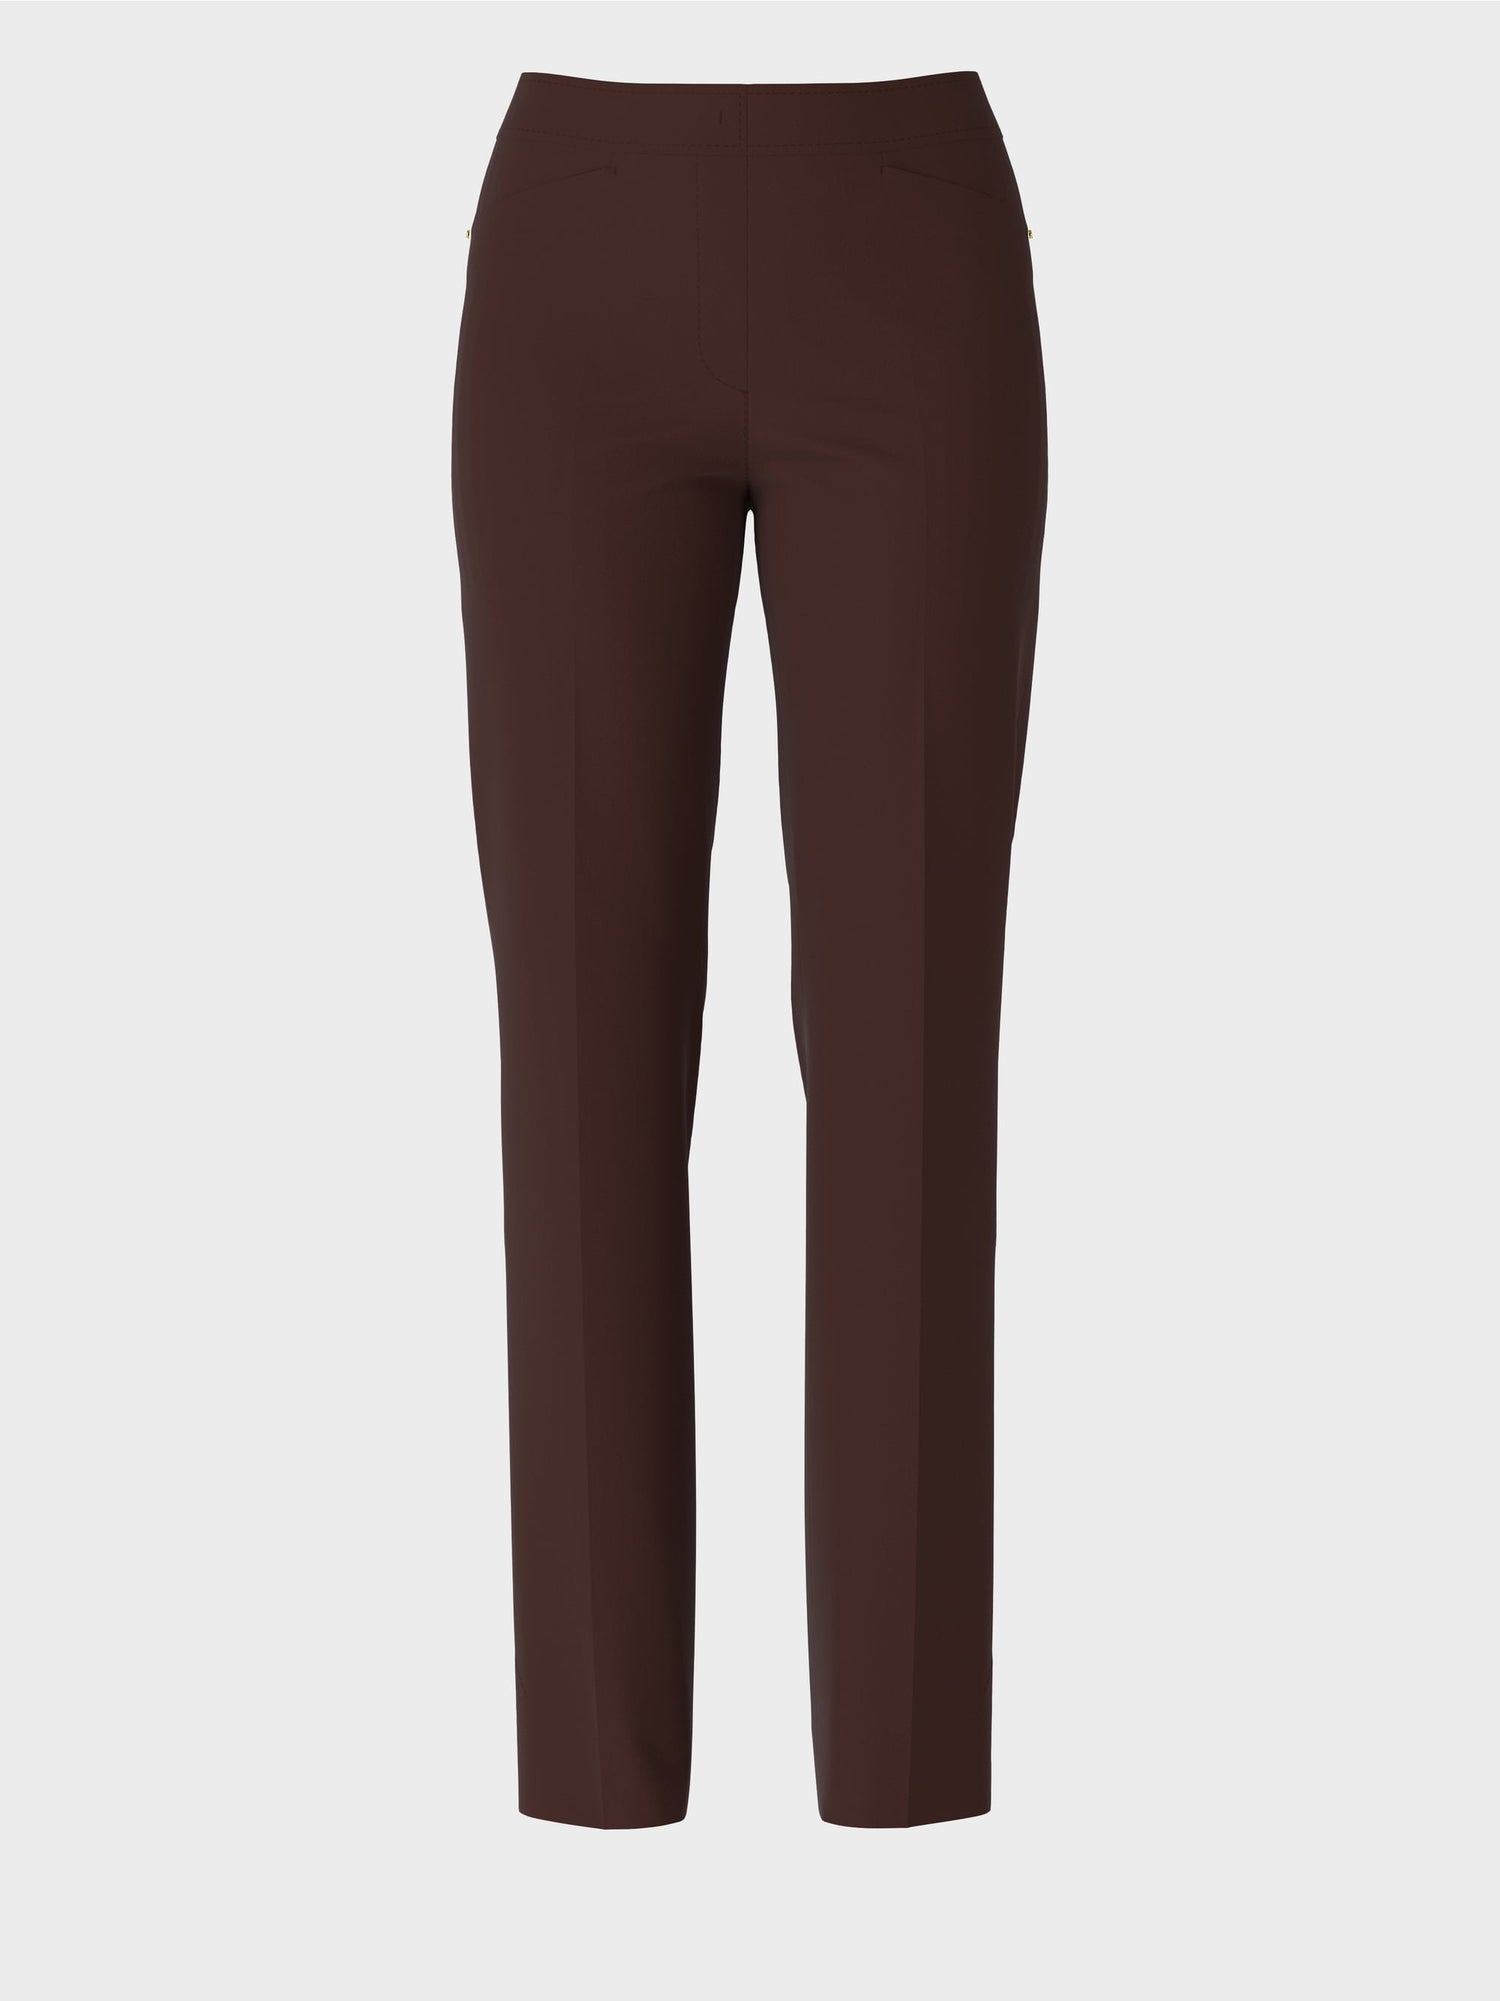 Fendou Stretch Pants With Crease_VC 81.42 W09_699_05